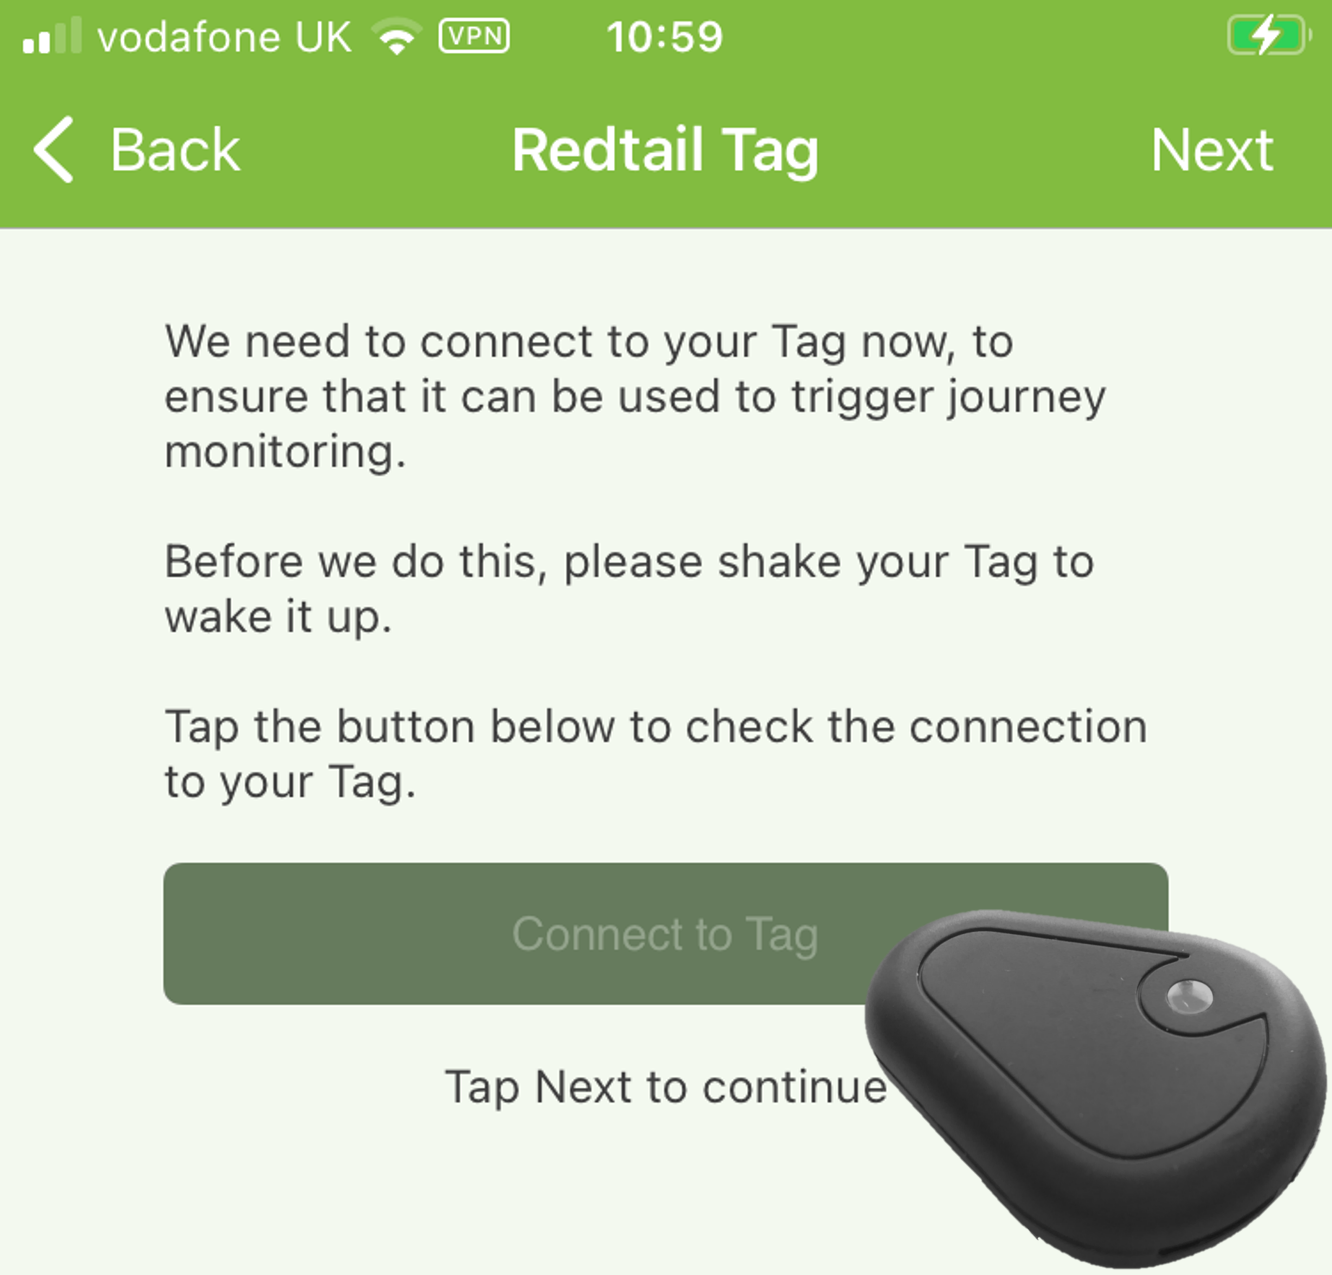 Redtail-Telematics-and-IoT-solutions-app-and-tag